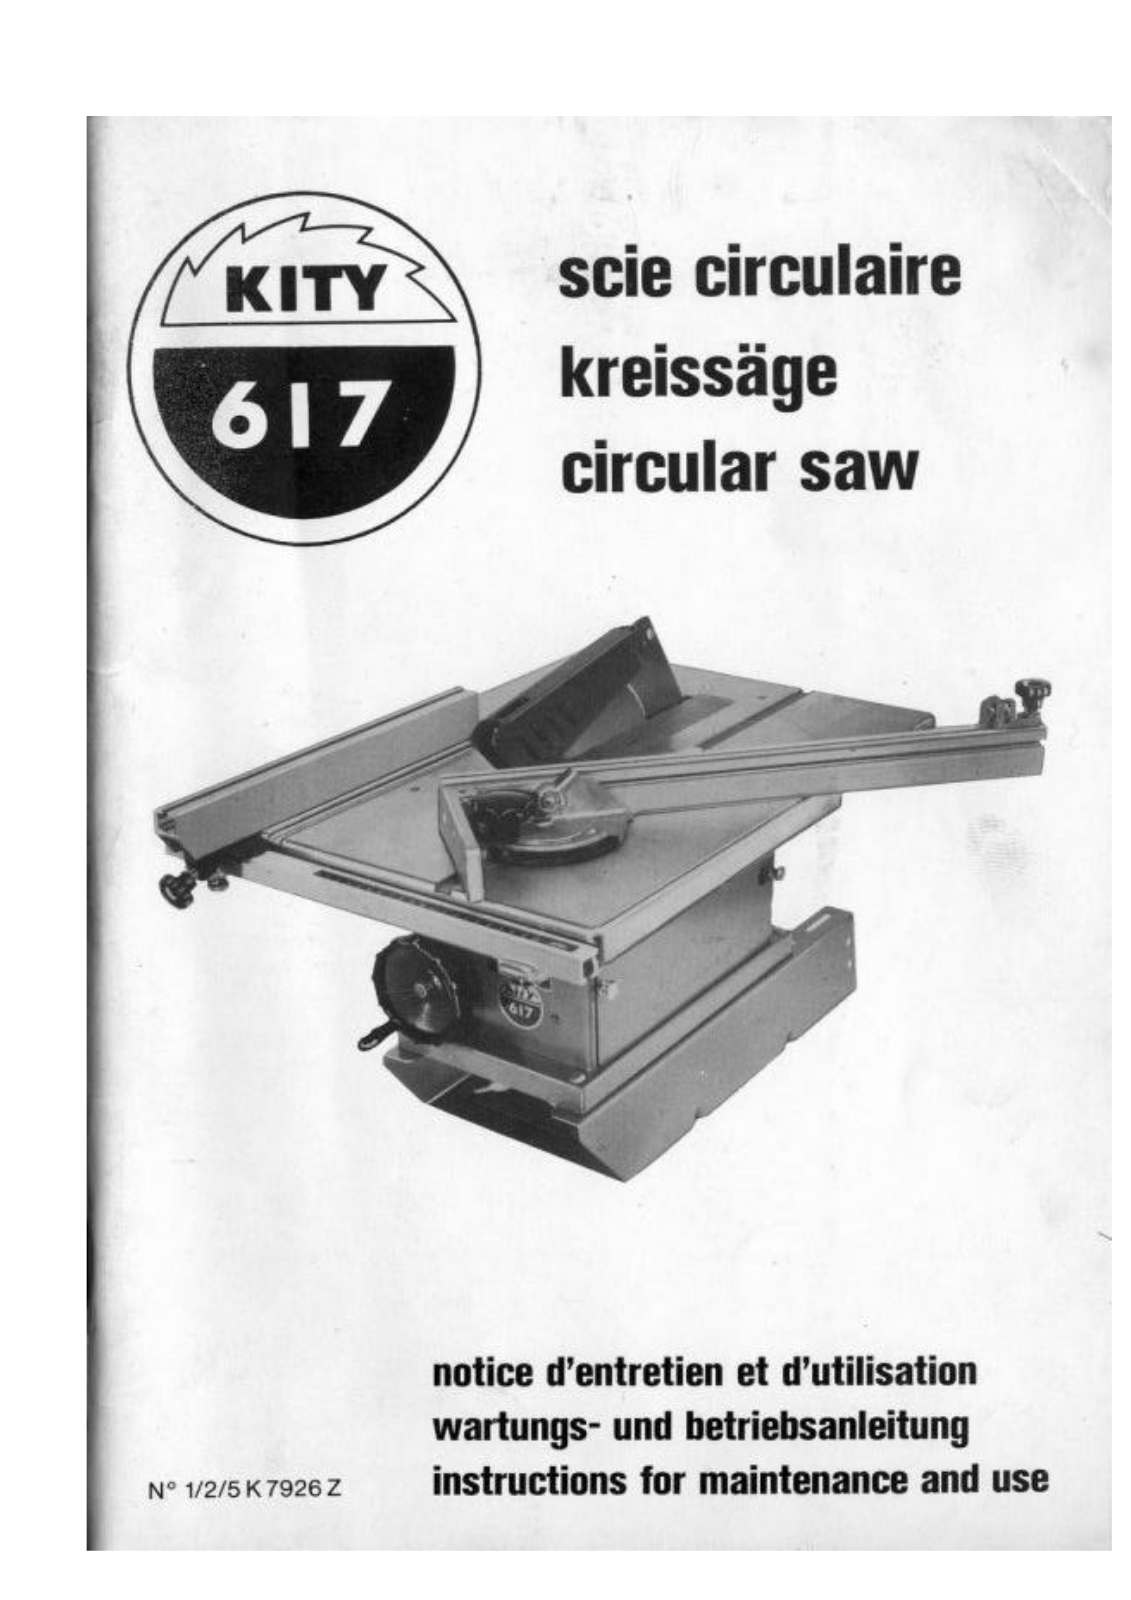 KITY SCIE CIRCULAIRE 617 User Manual